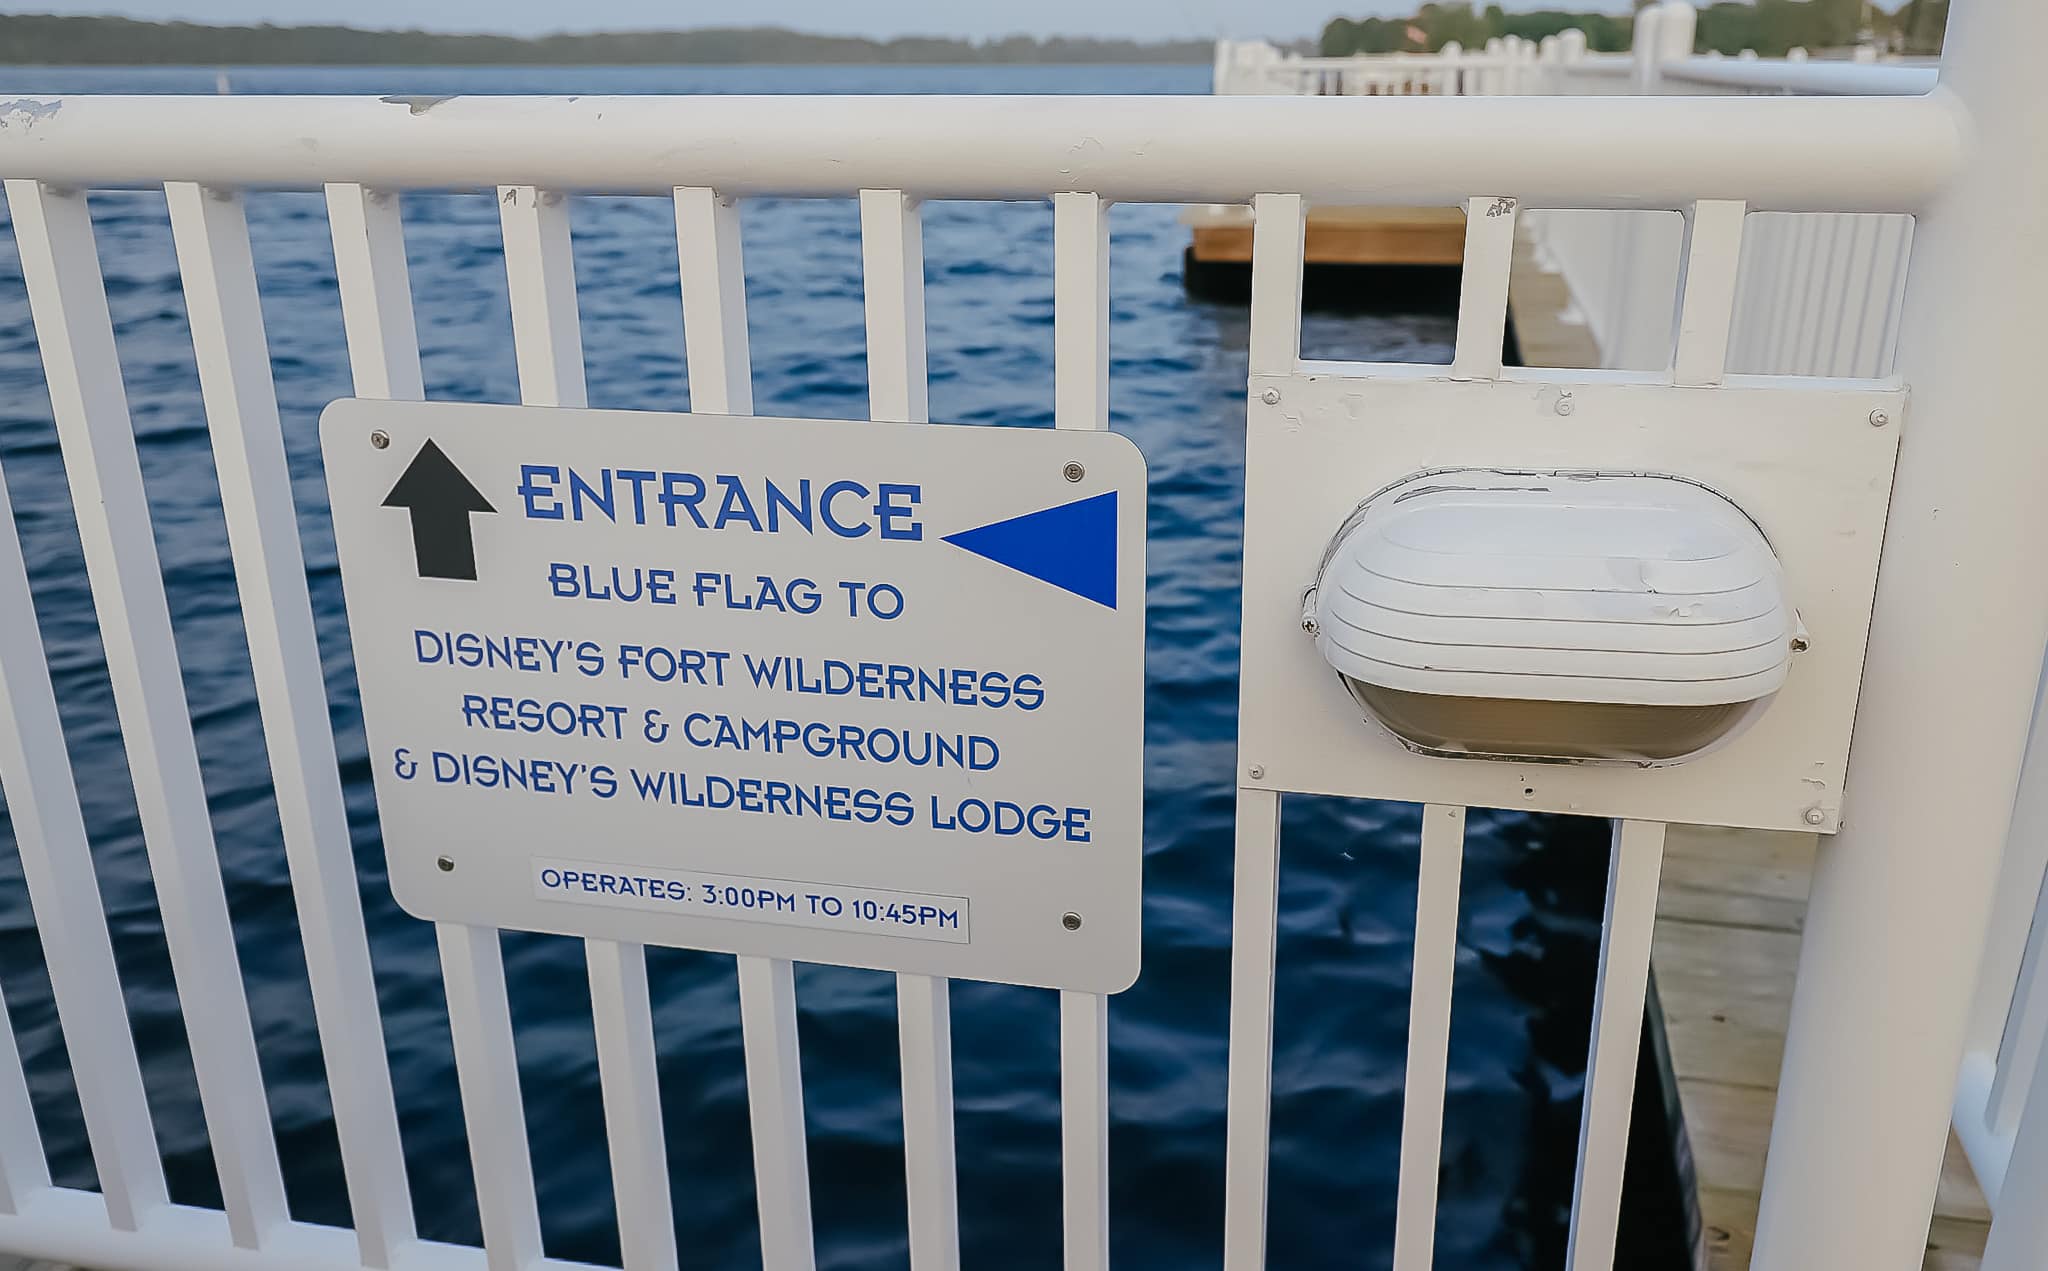 boat service from Contemporary to Fort Wilderness and Wilderness Lodge